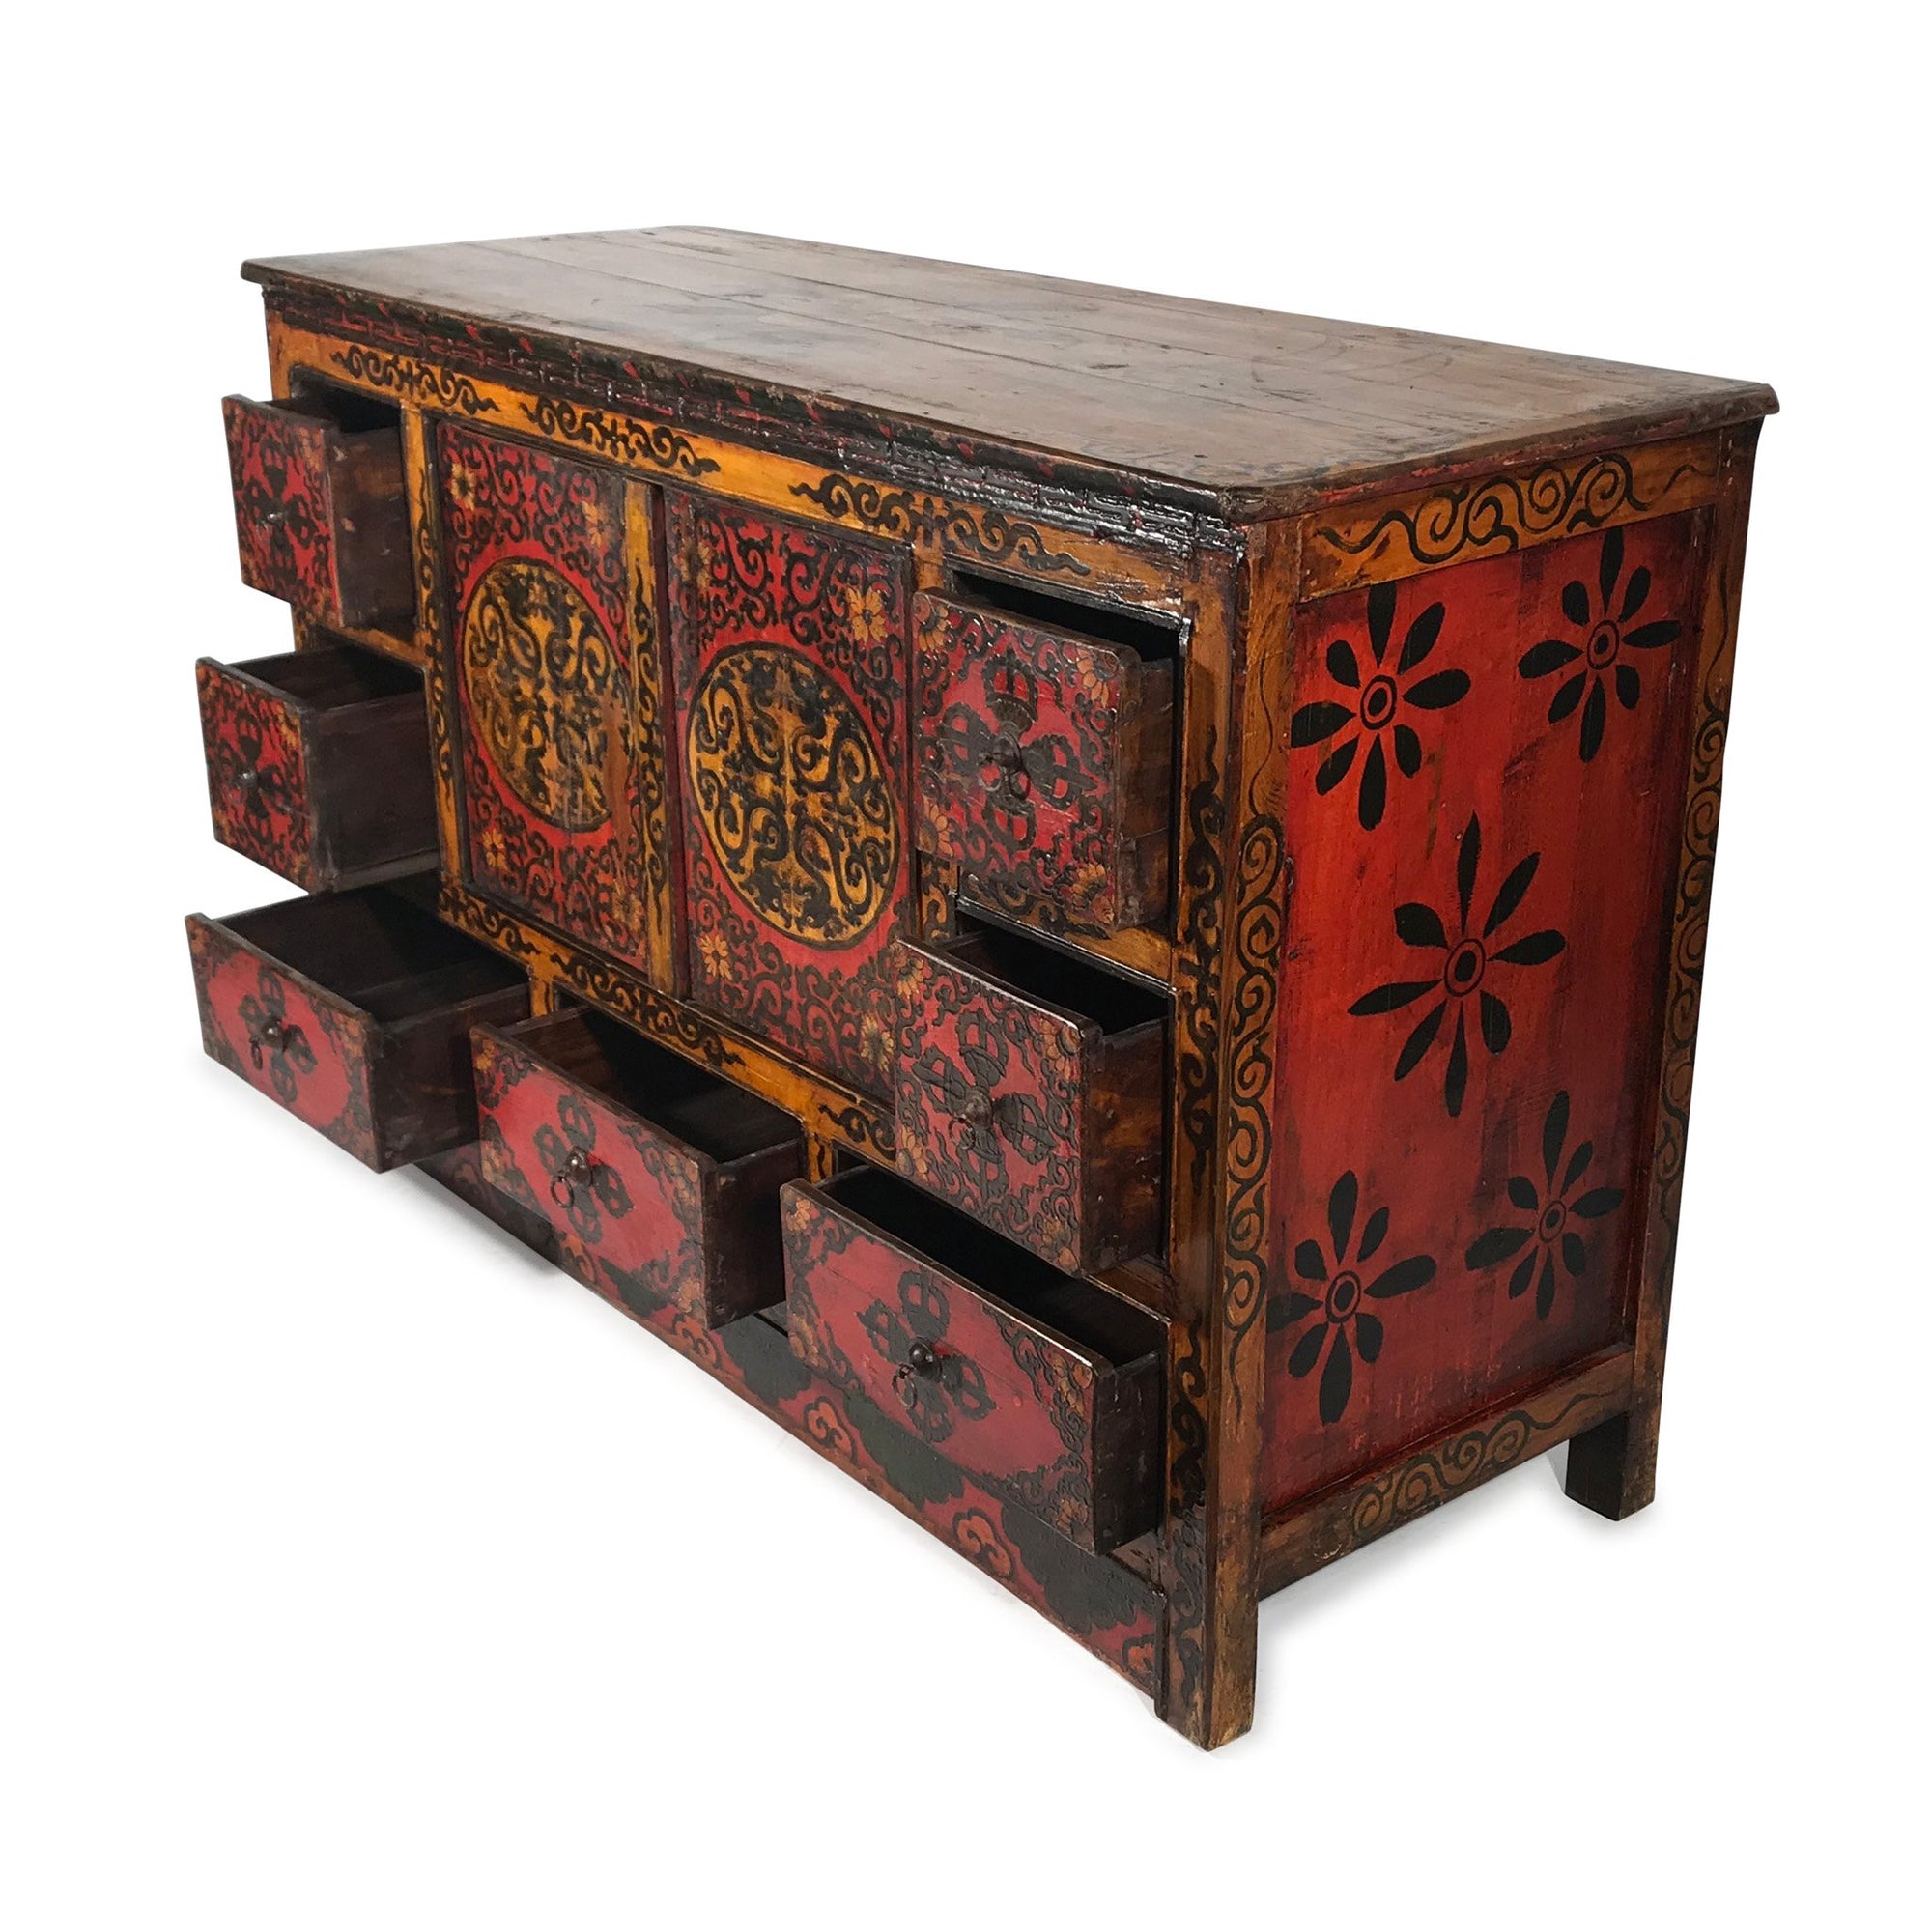 Reproduction Painted Altar Cabinet From Tibet - 126 x 46 x 83 (wxdxh cms) - C1526